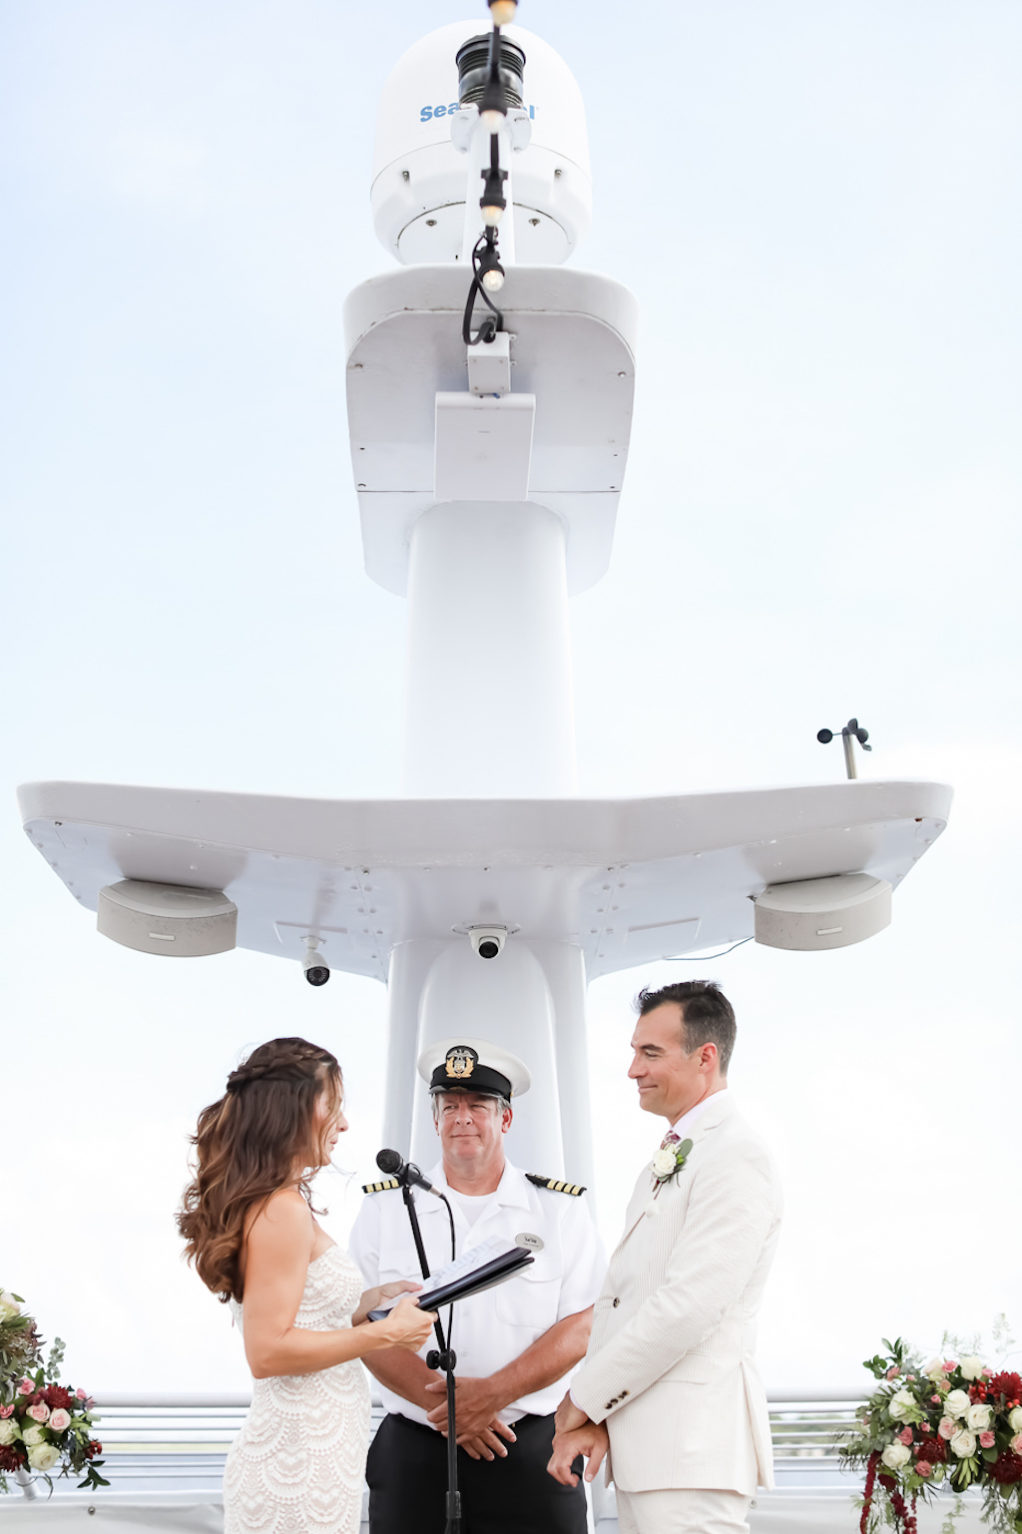 Florida Bride and Groom Exchanging Vows During Wedding Ceremony Portrait | Tampa Bay Wedding Photographer Lifelong Photography Studio | Clearwater Beach Waterfront Wedding Venue Yacht Starship